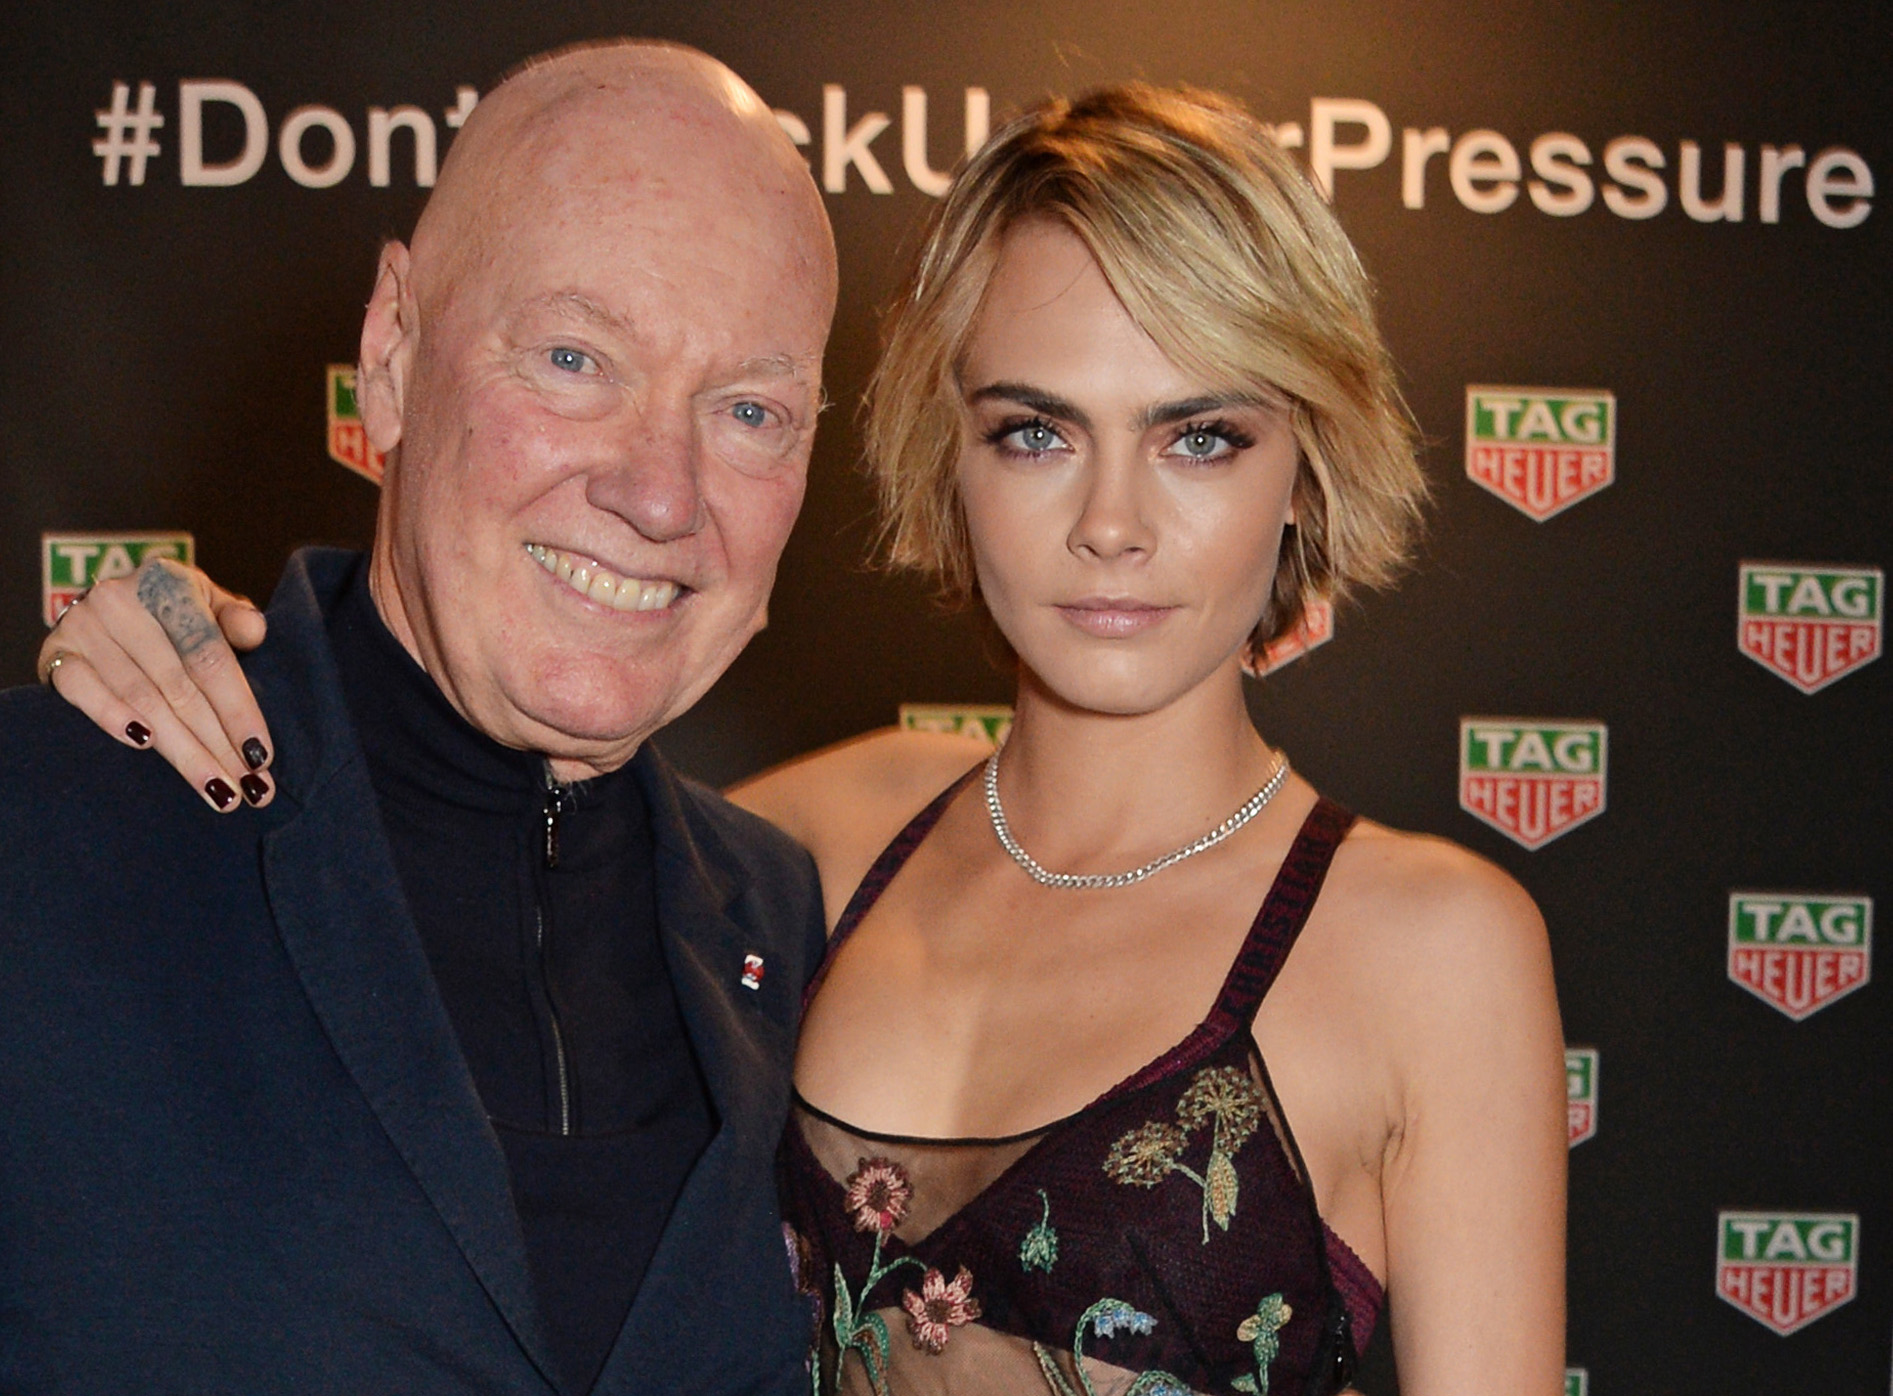 Dmb tag heuer cara delevingne auction009 1